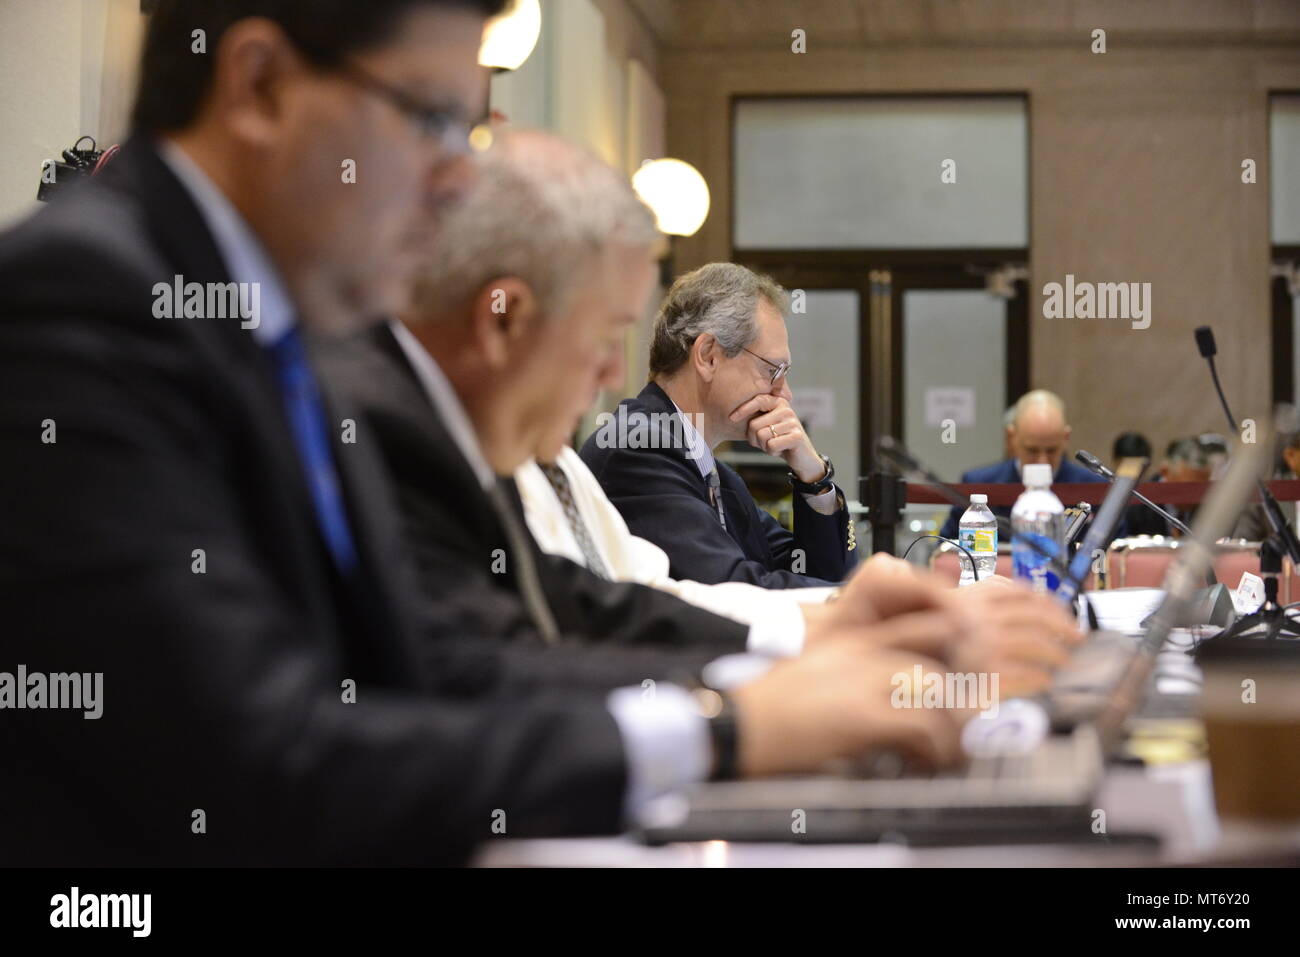 Members of the parties in interest, including the American Bureau of Shipping and Herbert Engineering, prepare to hear testimony Thursday, Feb. 9, 2017, during the final S.S. El Faro Marine Board of Investigation hearing in Jacksonville, Florida. Along with the official panel, other parties in interest were present to direct questions to different witnesses. U.S. Coast Guard photo by Petty Officer 2nd Class Anthony L. Soto Stock Photo